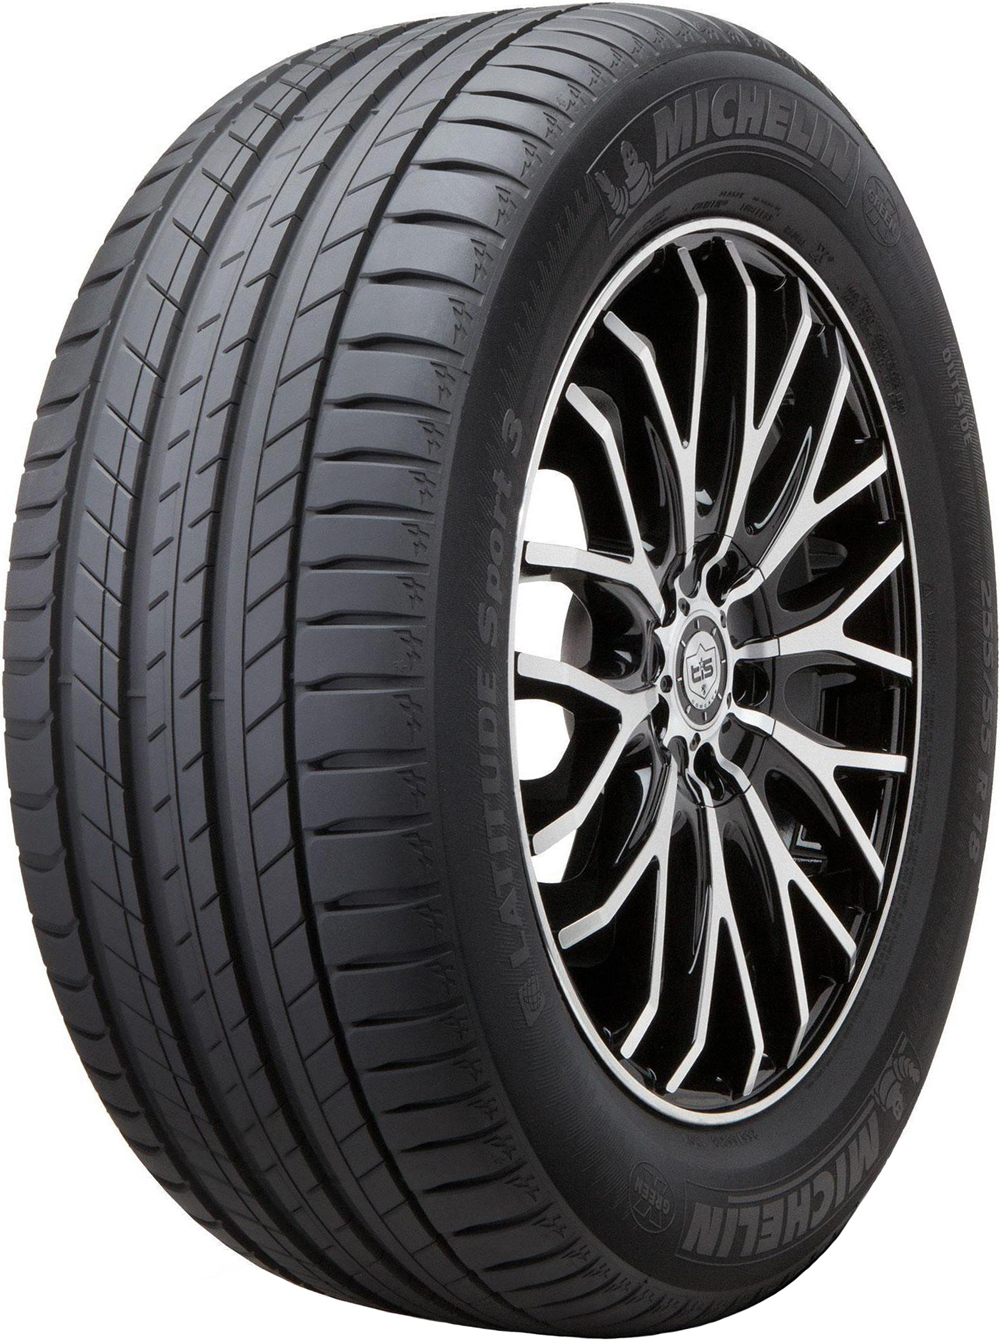 Anvelope jeep MICHELIN LATSP3MOSA MERCEDES 315/40 R21 111Y